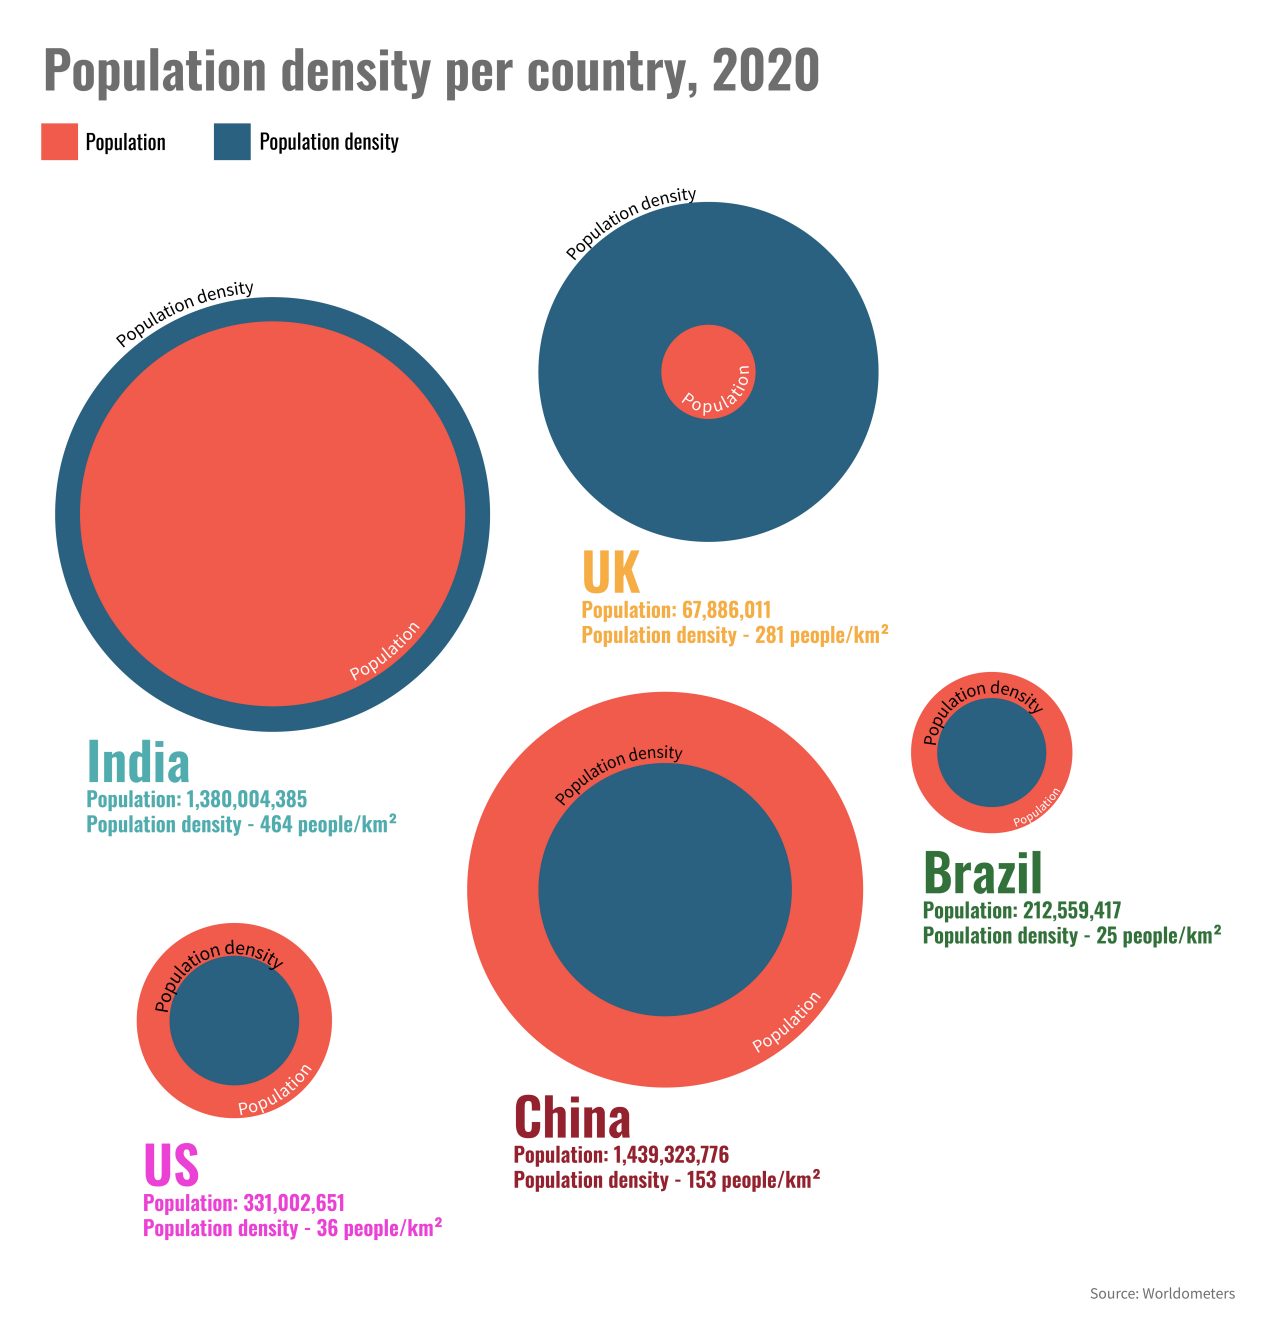 Population density per country, 2020 chart